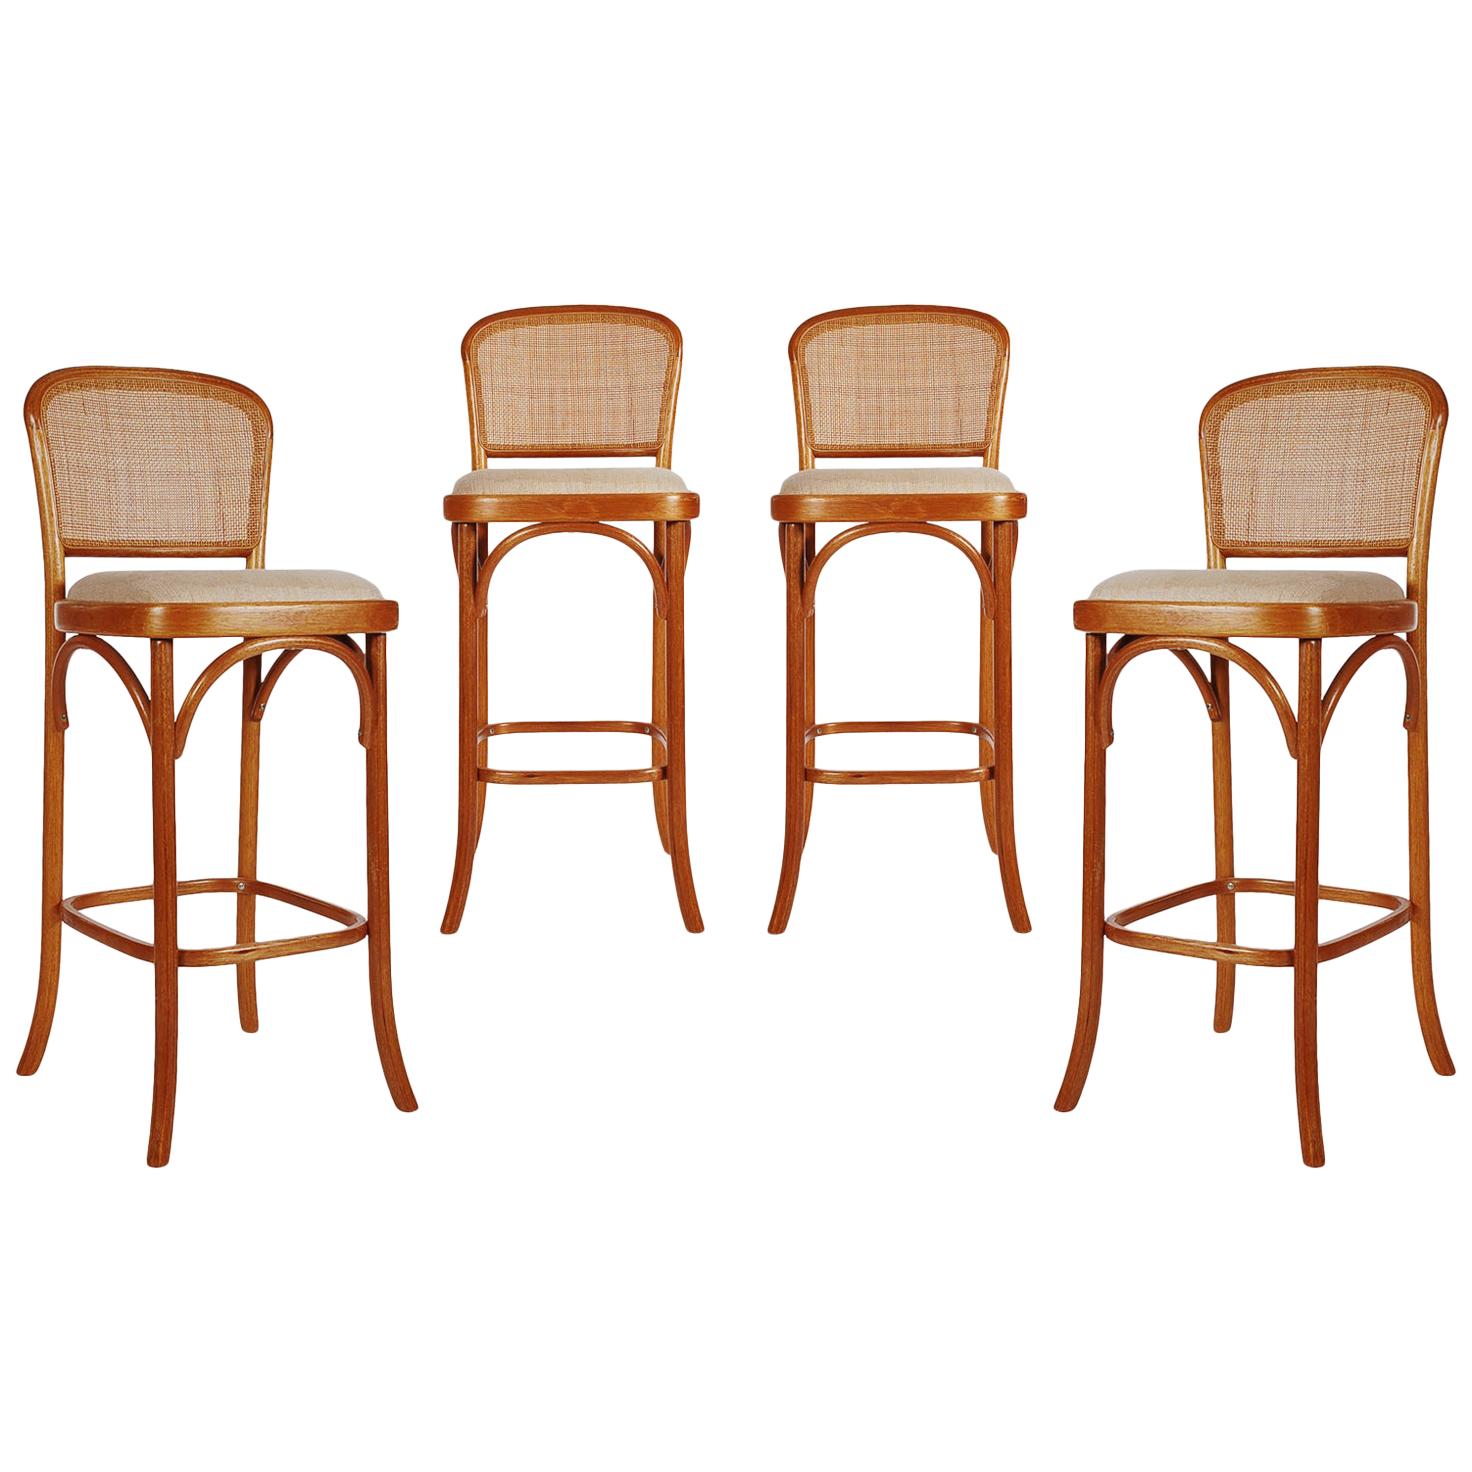 Set of 4 Mid-Century Modern Cane Back Bar Stools after Le Corbusier for Thonet